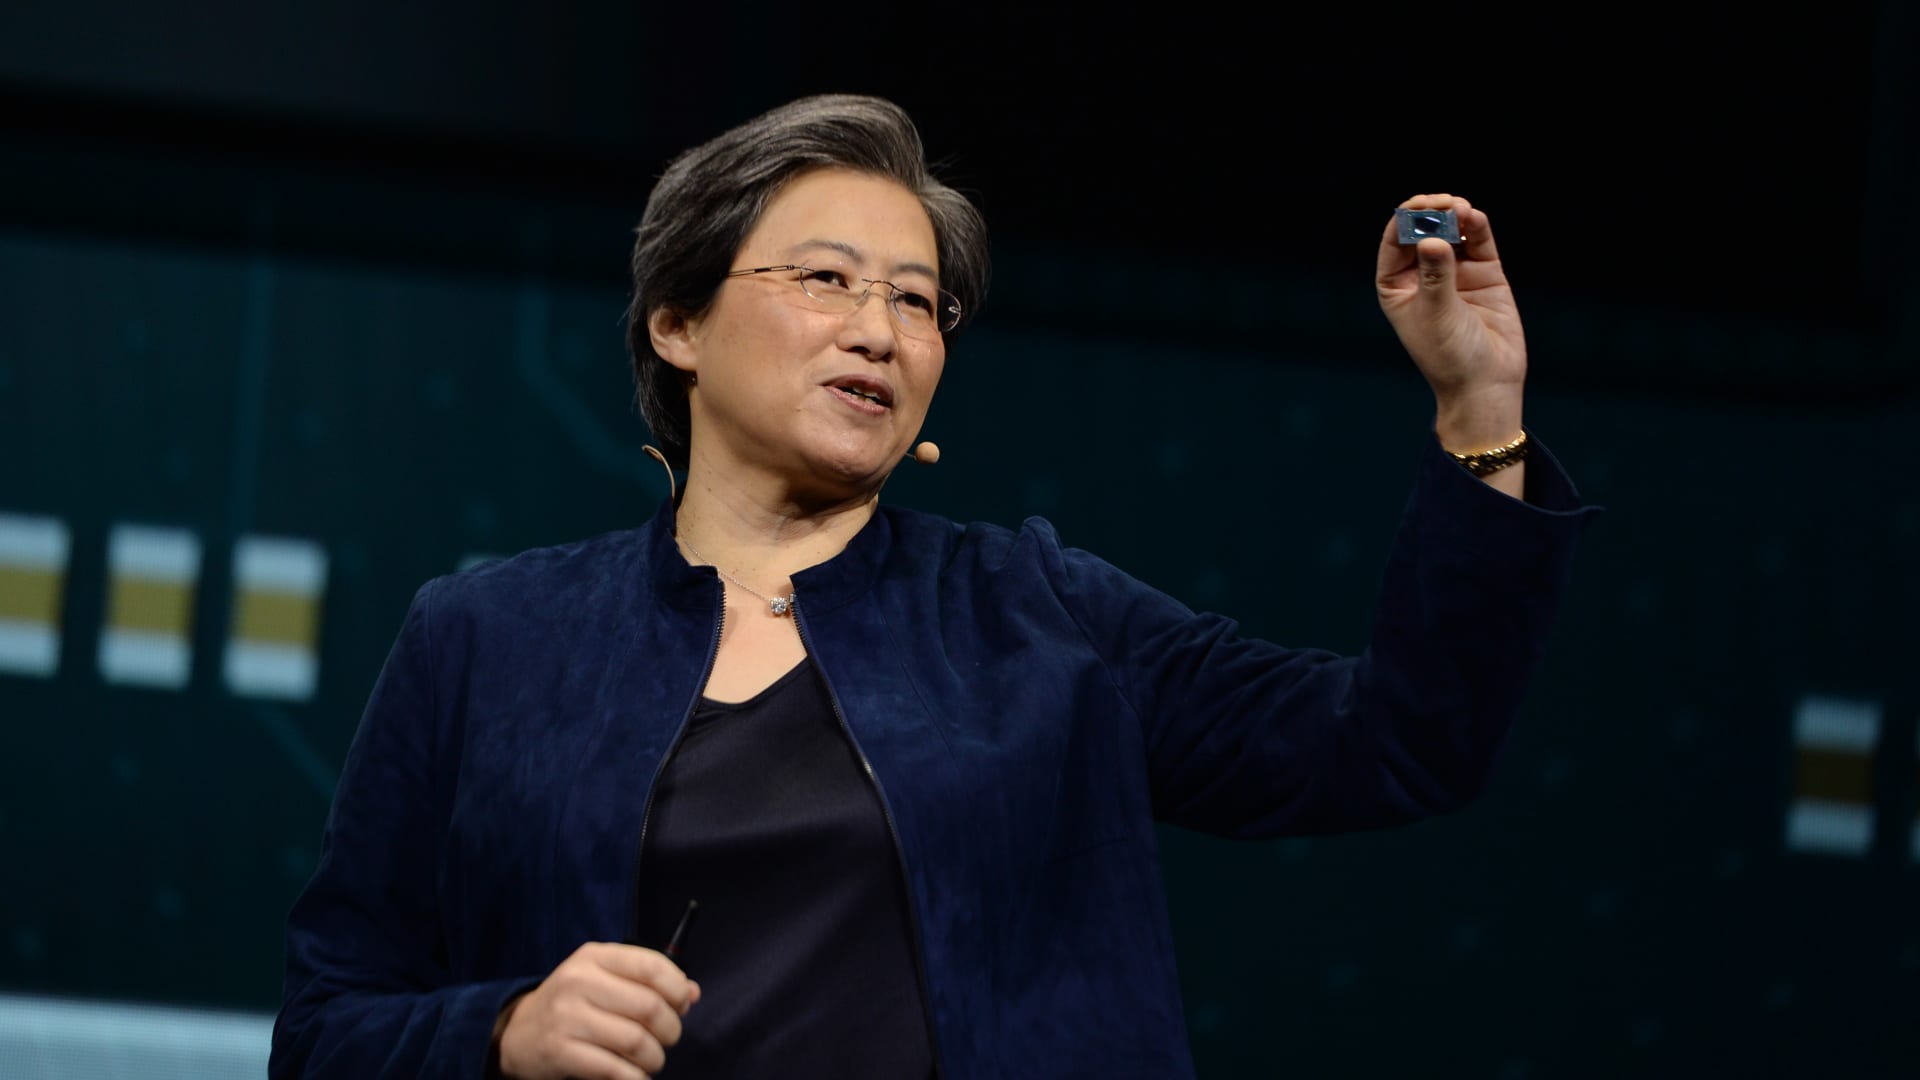 Lisa Su, president and chief executive officer of Advanced Micro Devices Inc. (AMD), presents the AMD Ryzen 4000 series chip during an AMD press event at CES 2020 in Las Vegas, Nevada, U.S., on Monday, Jan. 6, 2020.